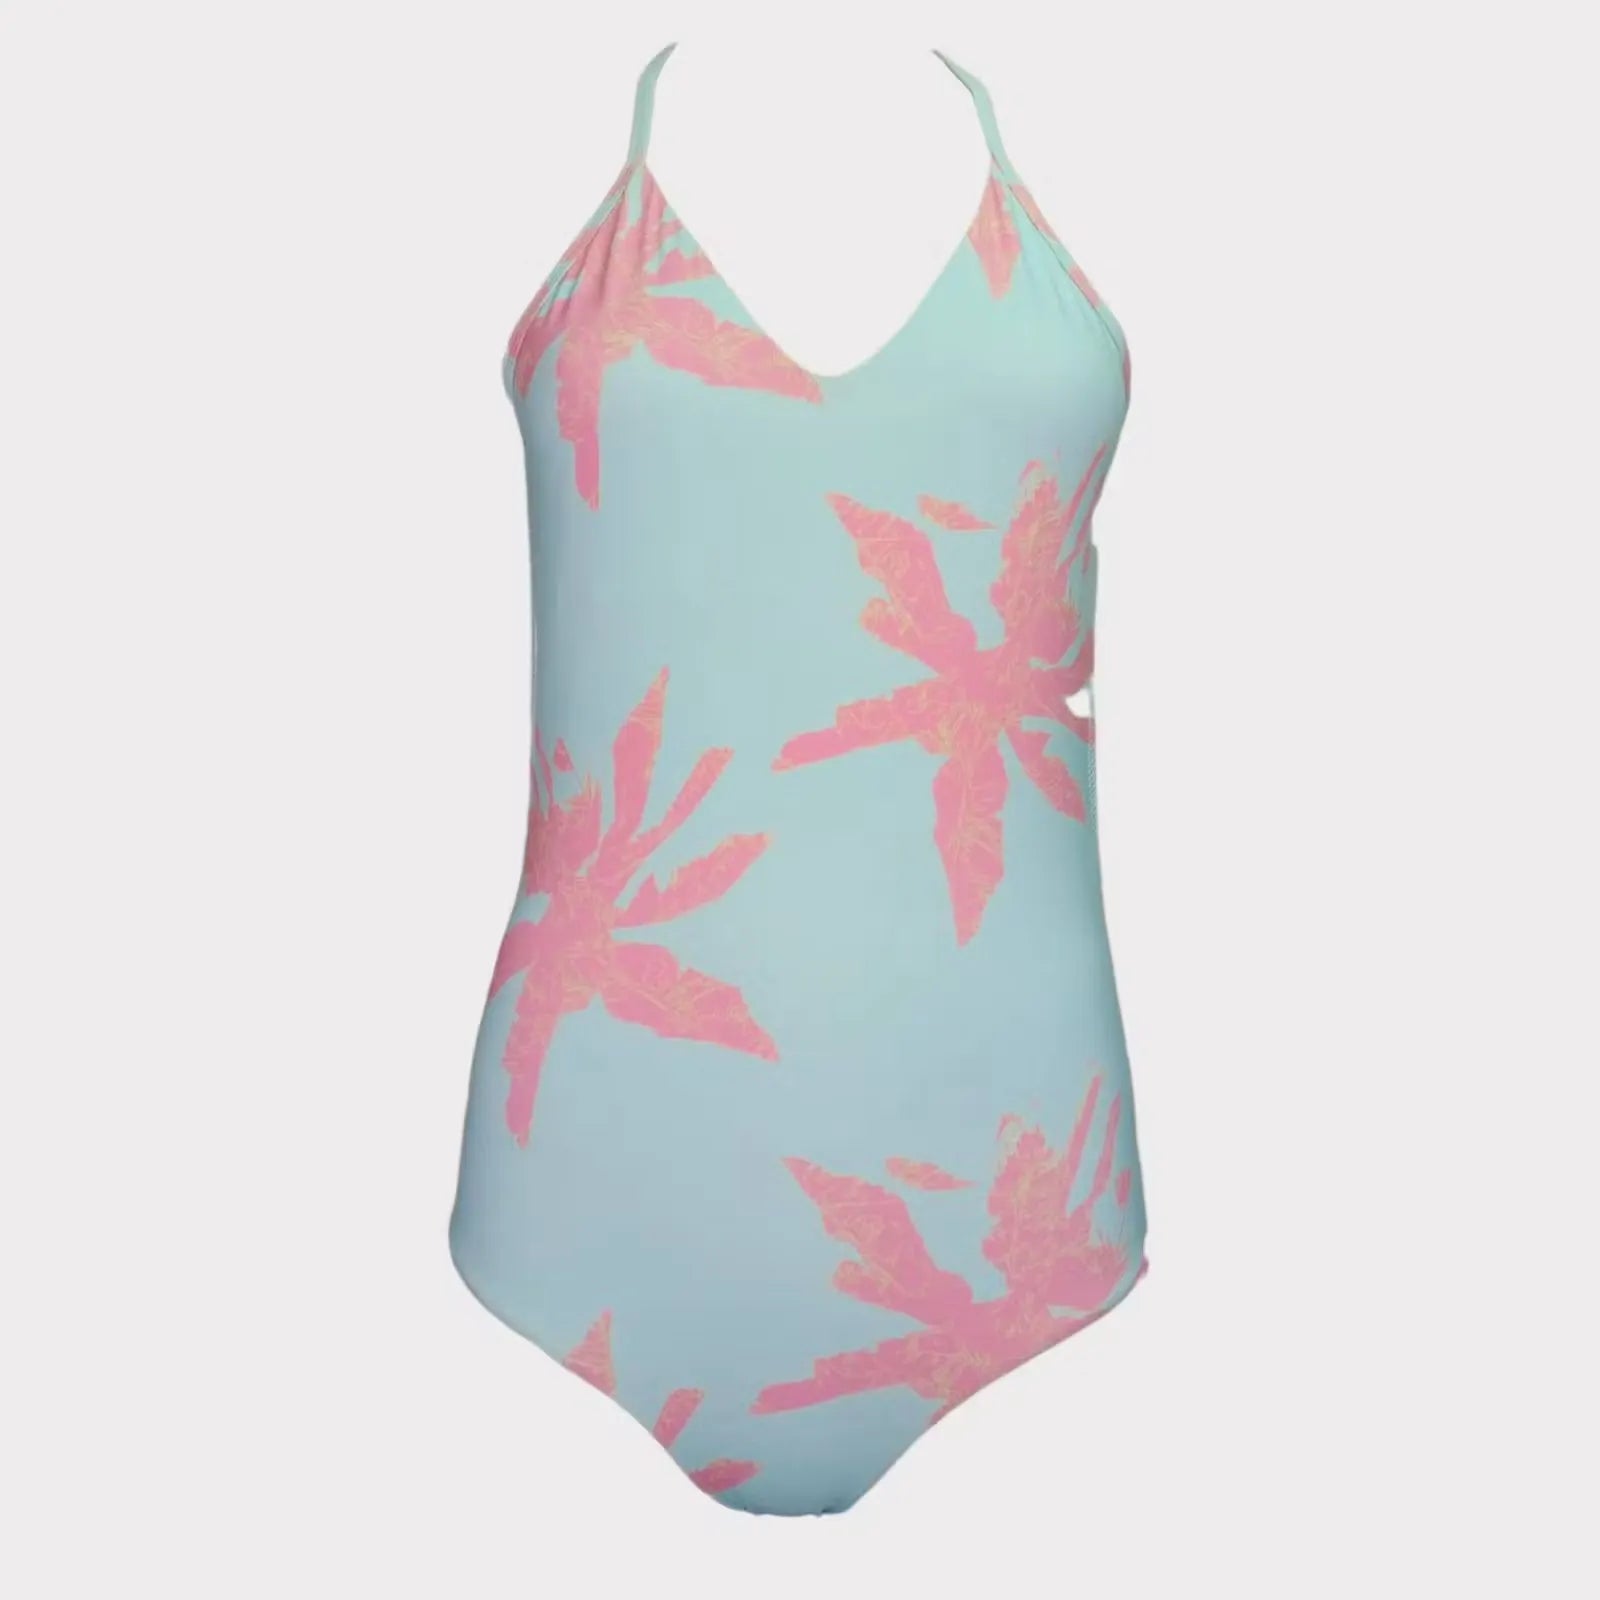 Sophia Simone Costa Swimsuit Palm - Embrace Tropical Vibes in Style